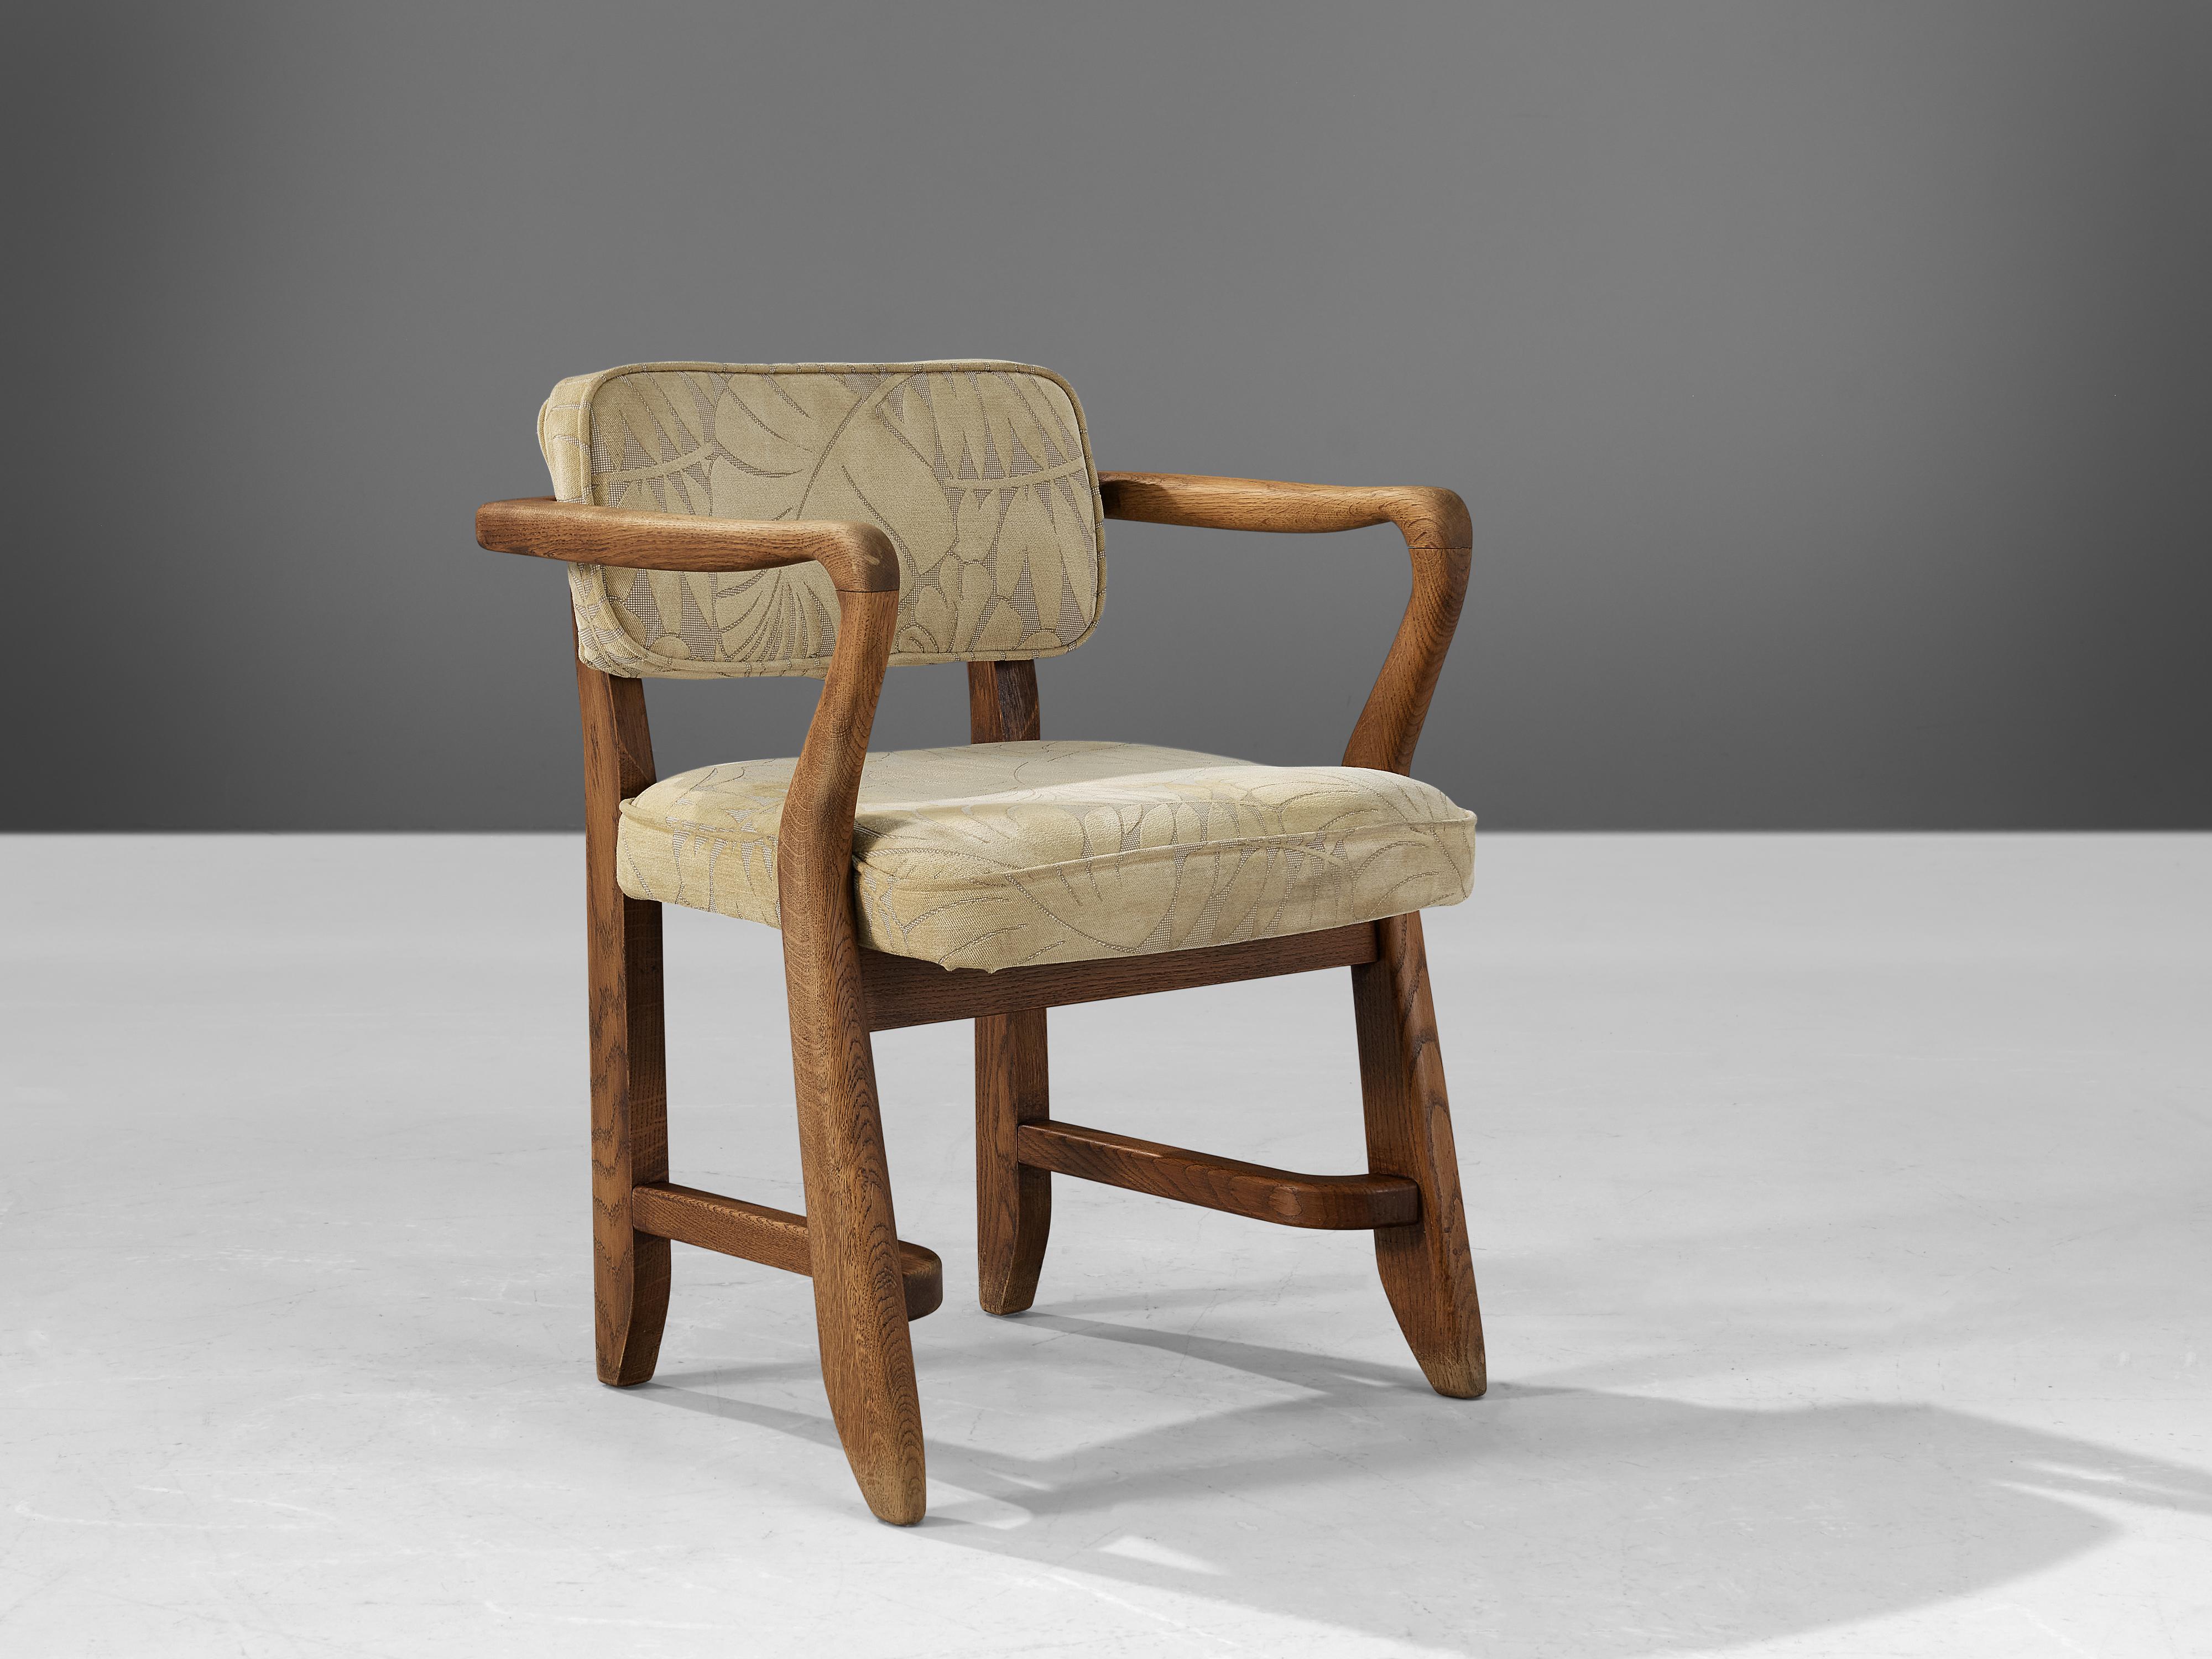 Guillerme & Chambron, 'Denis' armchairs, floral fabric, oak, France, 1950s

This sculptural easy chair is designed by Guillerme & Chambron. The duo is known for their high quality solid oak furniture. The sculptural armchair has an interesting